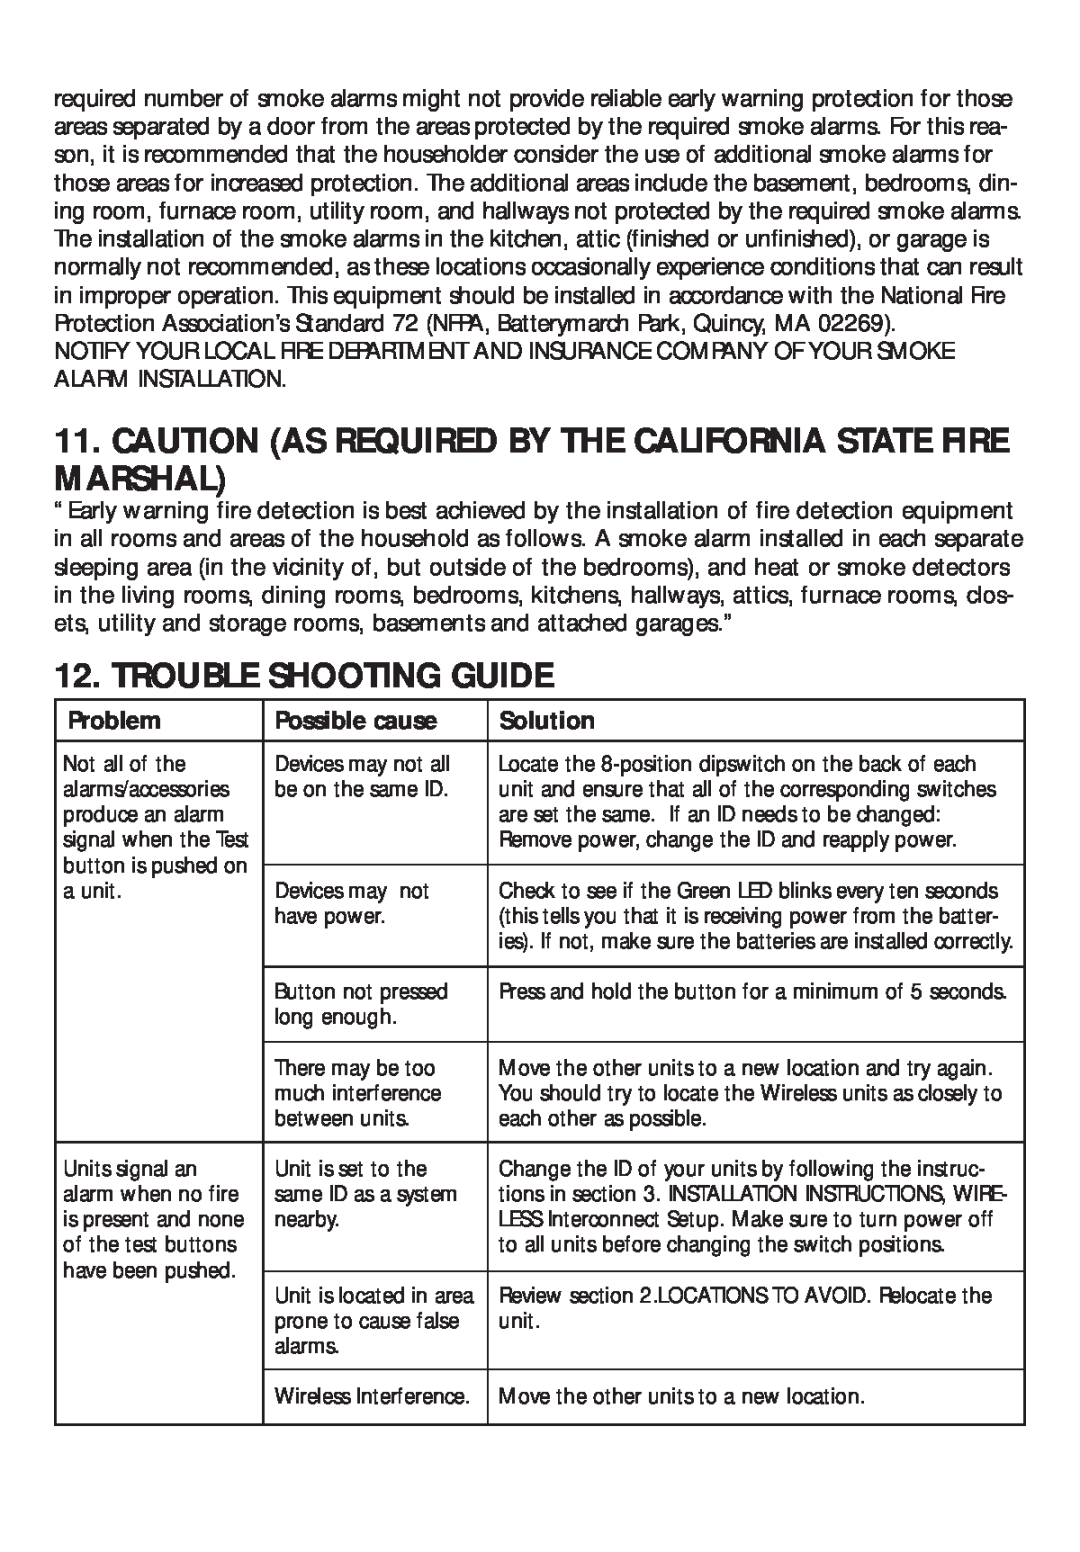 Kidde RF-SM-DC Caution As Required By The California State Fire Marshal, Trouble Shooting Guide, Problem, Possible cause 